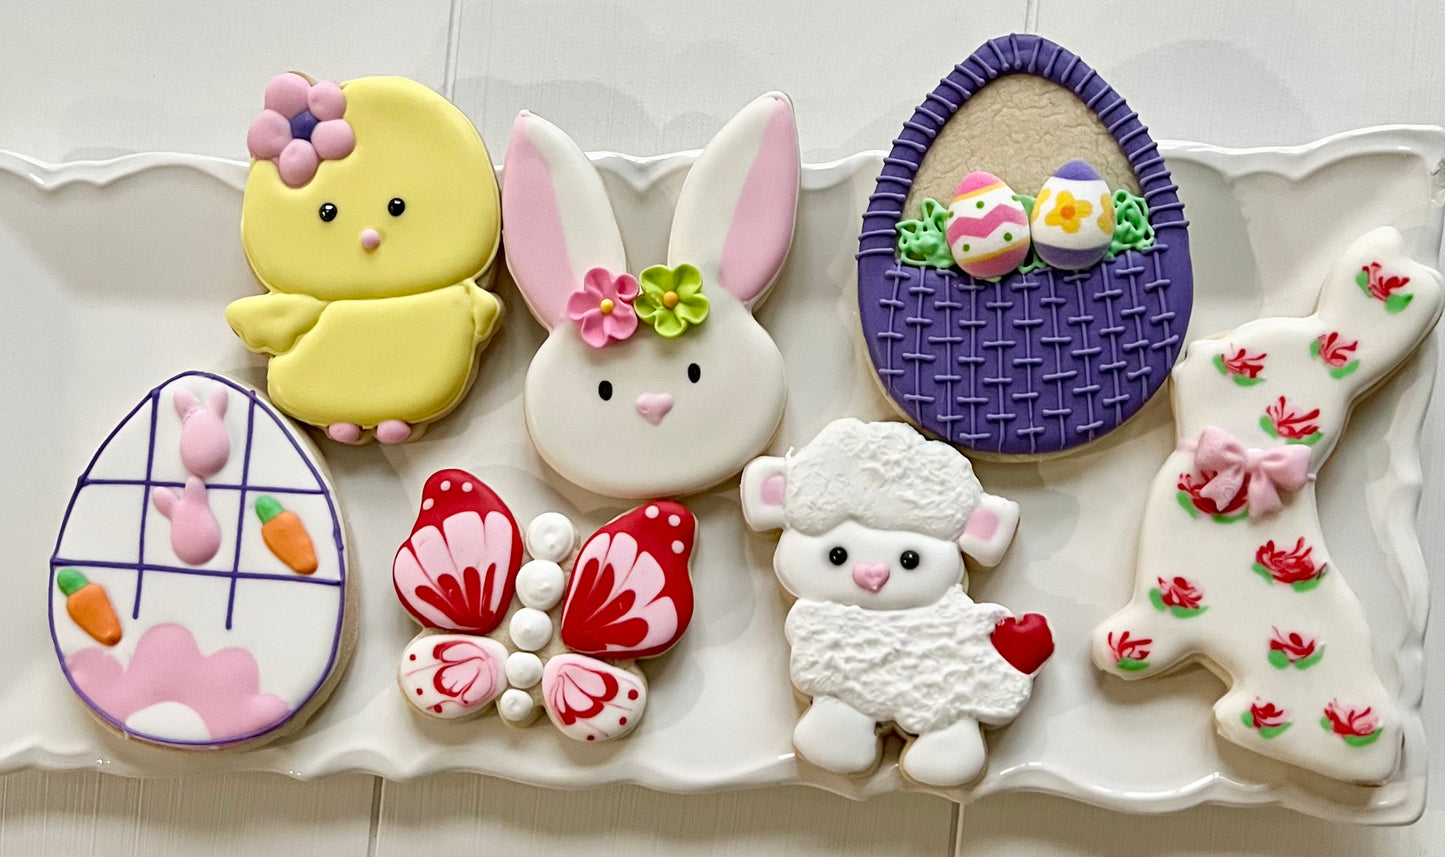 Tuesday 4/4/2023: PRIVATE Sugar Cookie Decorating class - Easter Theme (For Sue and her group)